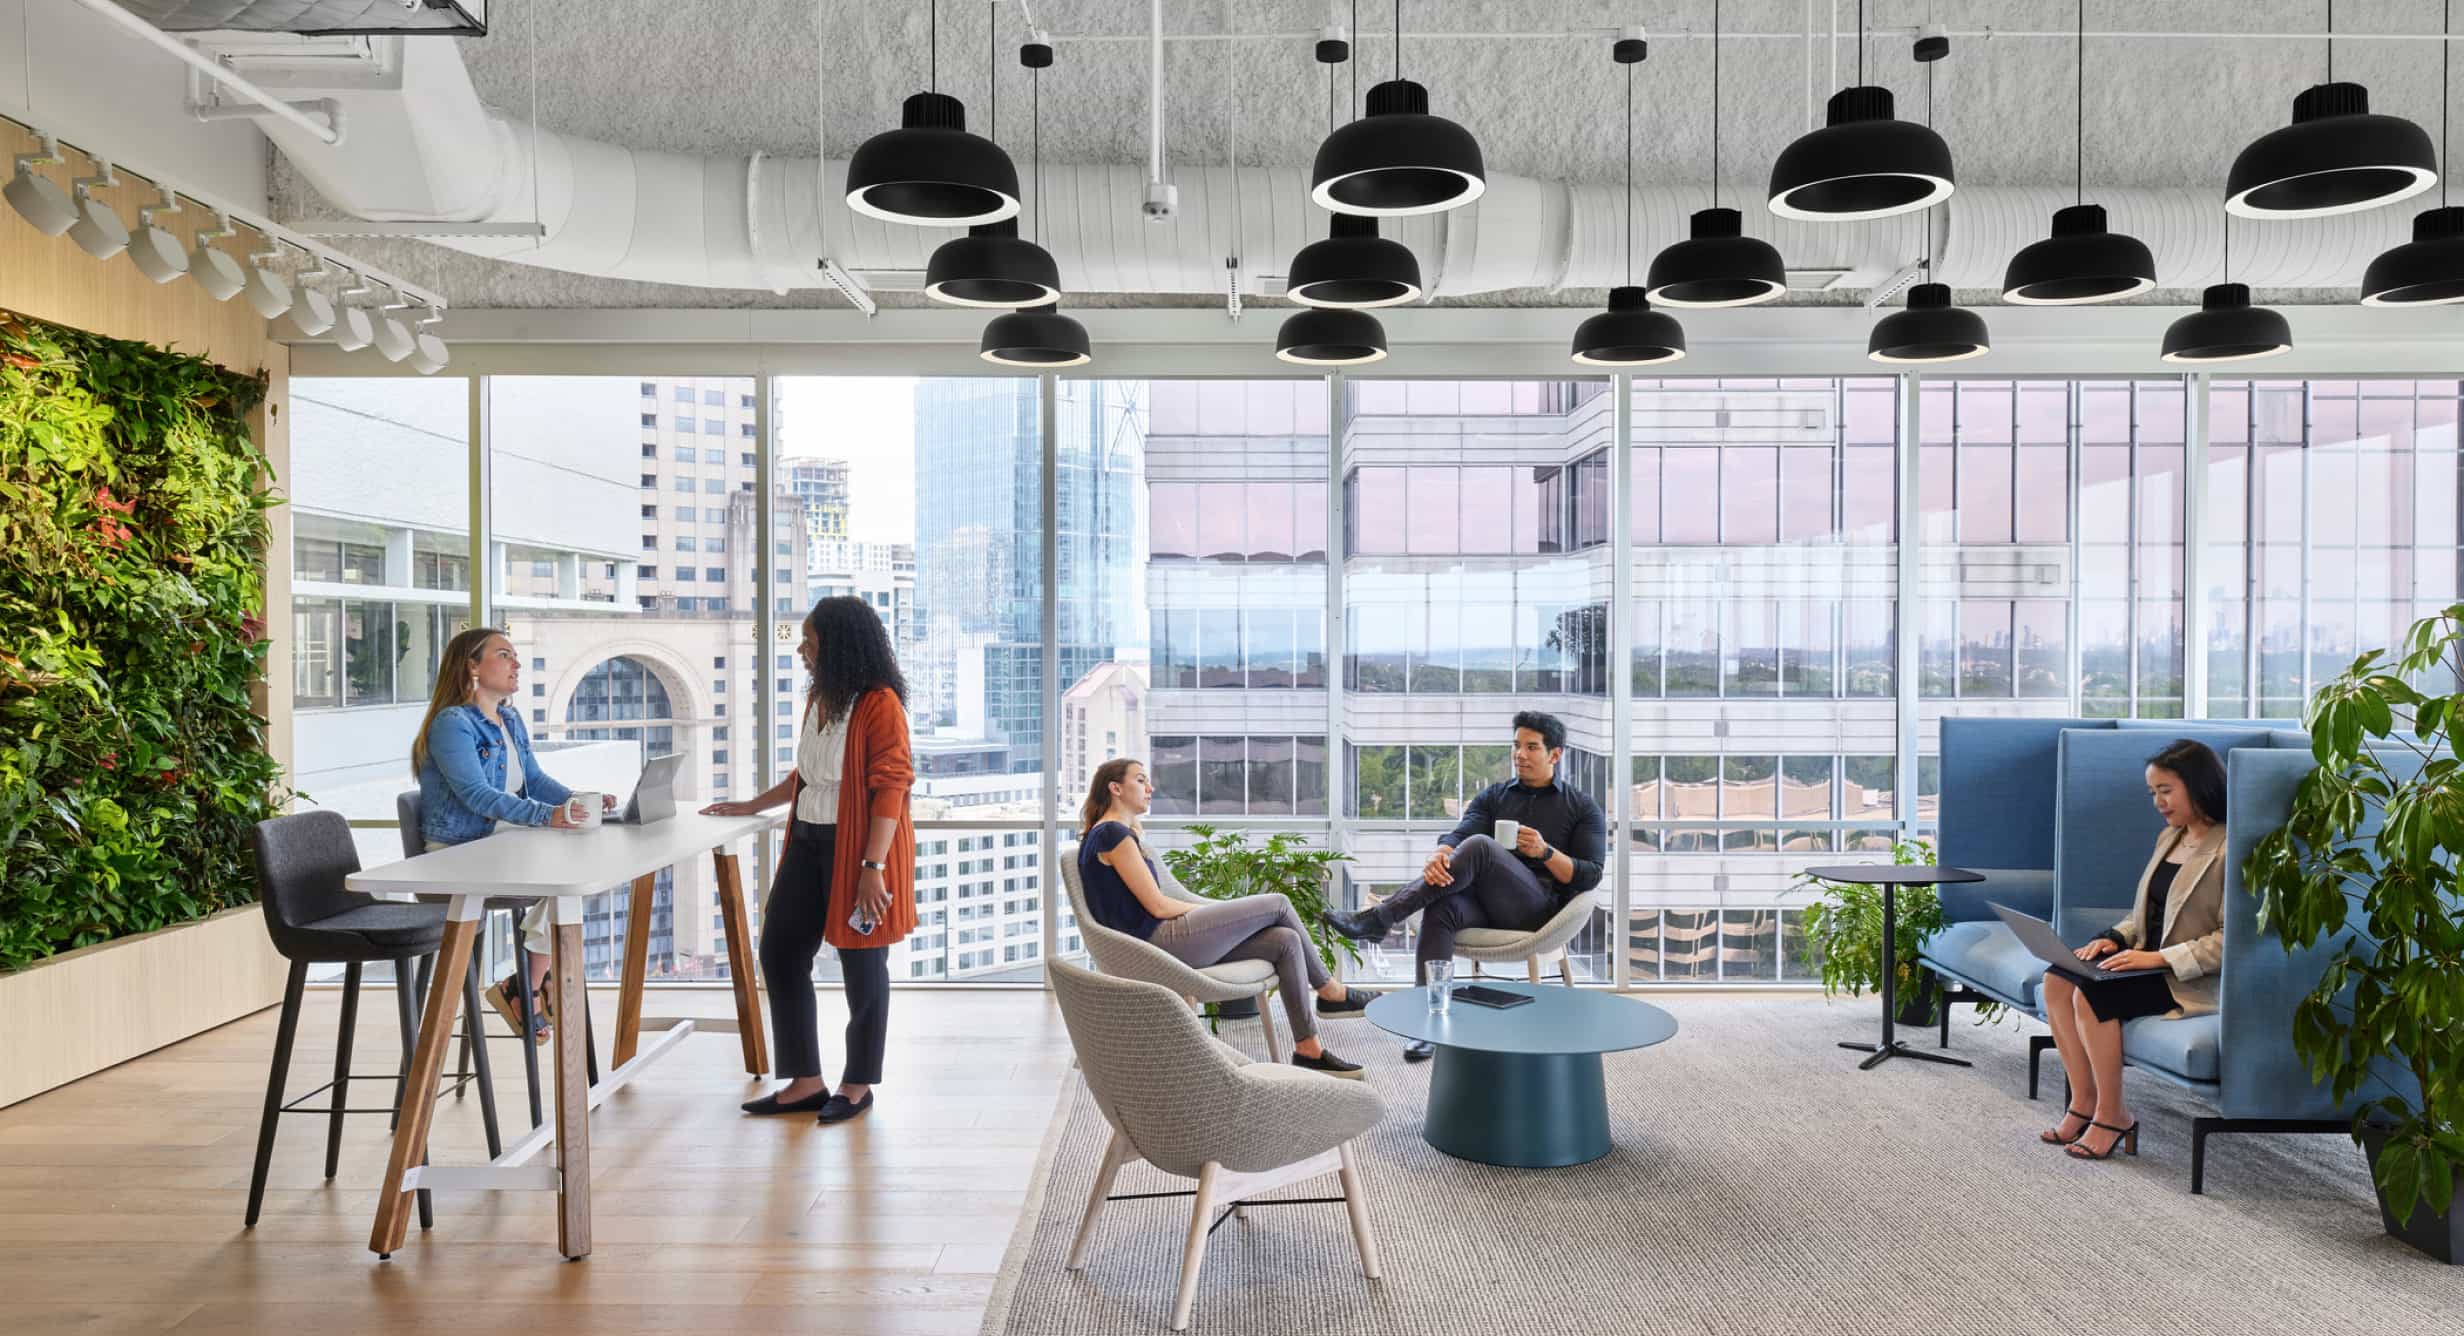 Why Come to the Office? To Unlock its Potential. Here’s How.